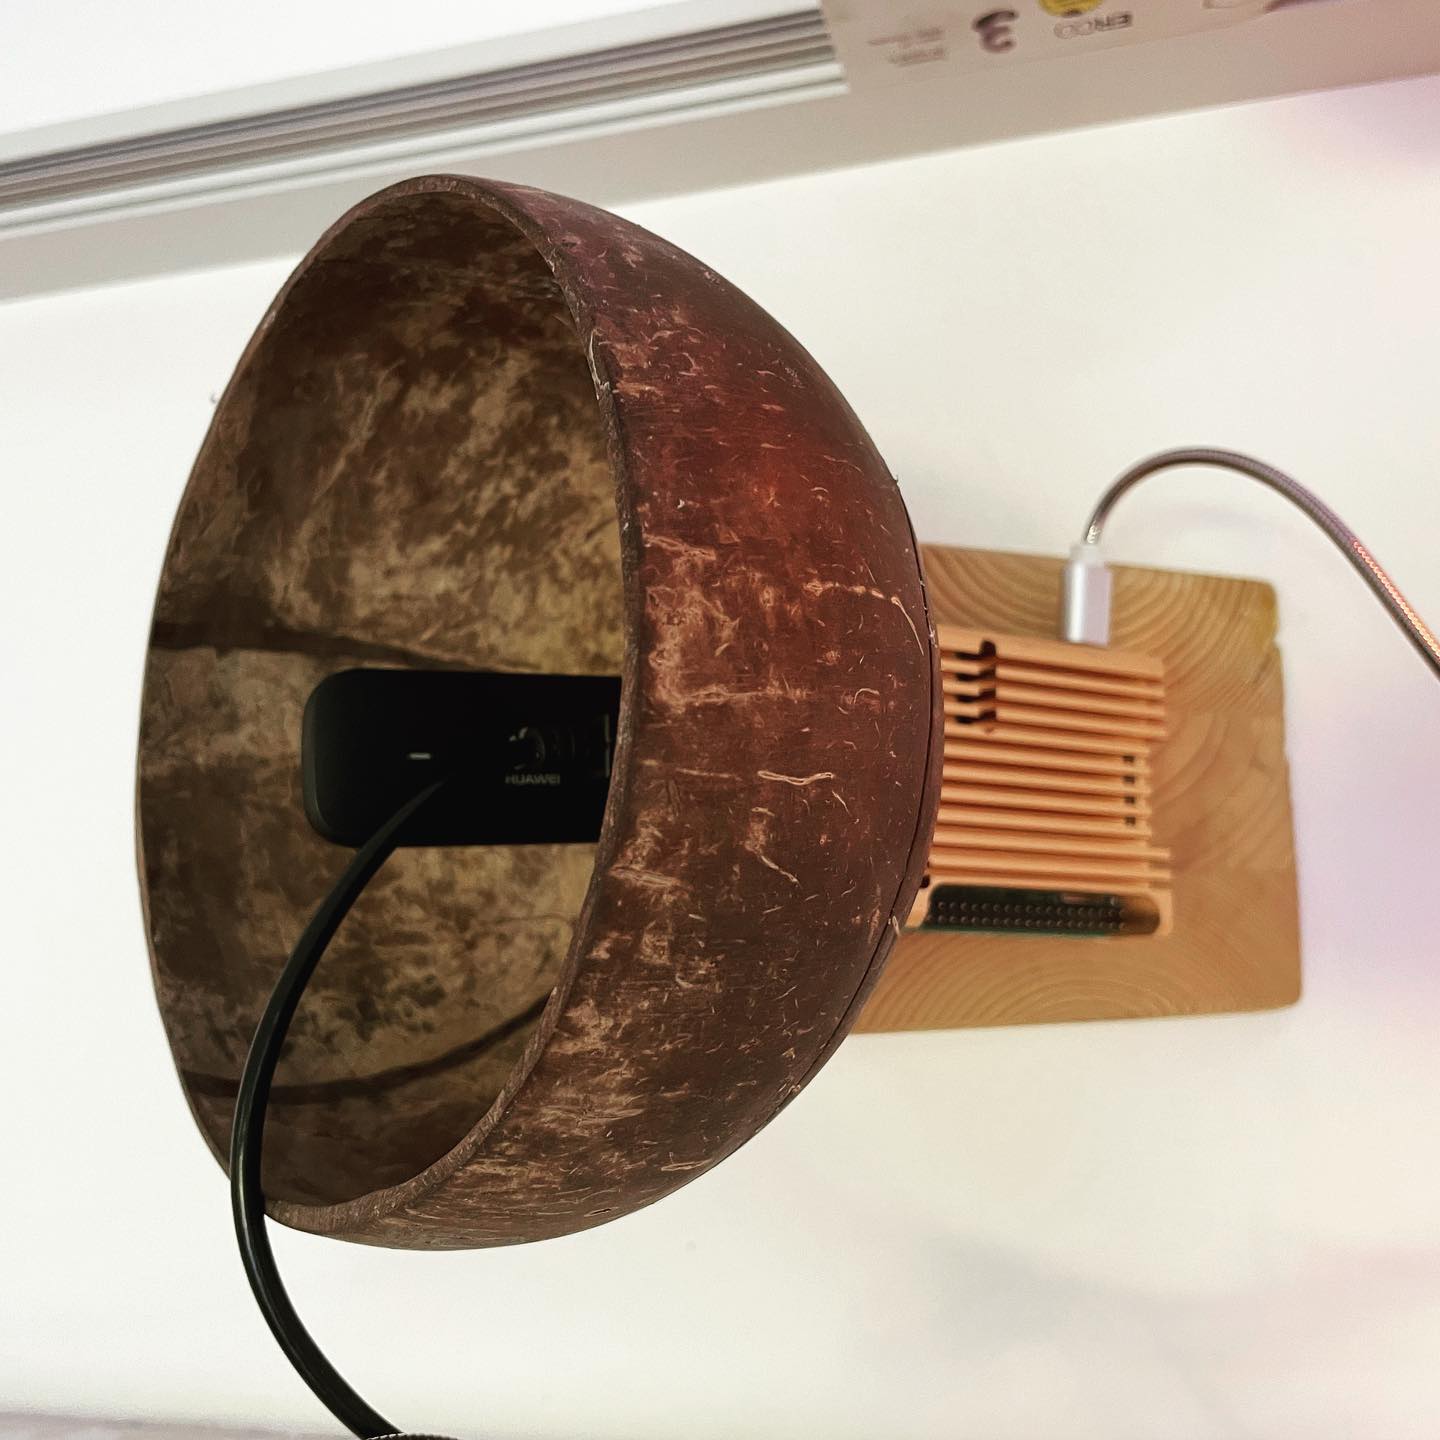 Pictured is a rusted cone with connected to a wooden panel - it is a Raspberry Pi ‘rhizomes’ or nodes for a Wi-Fi network that would be installed in a semi-public space.